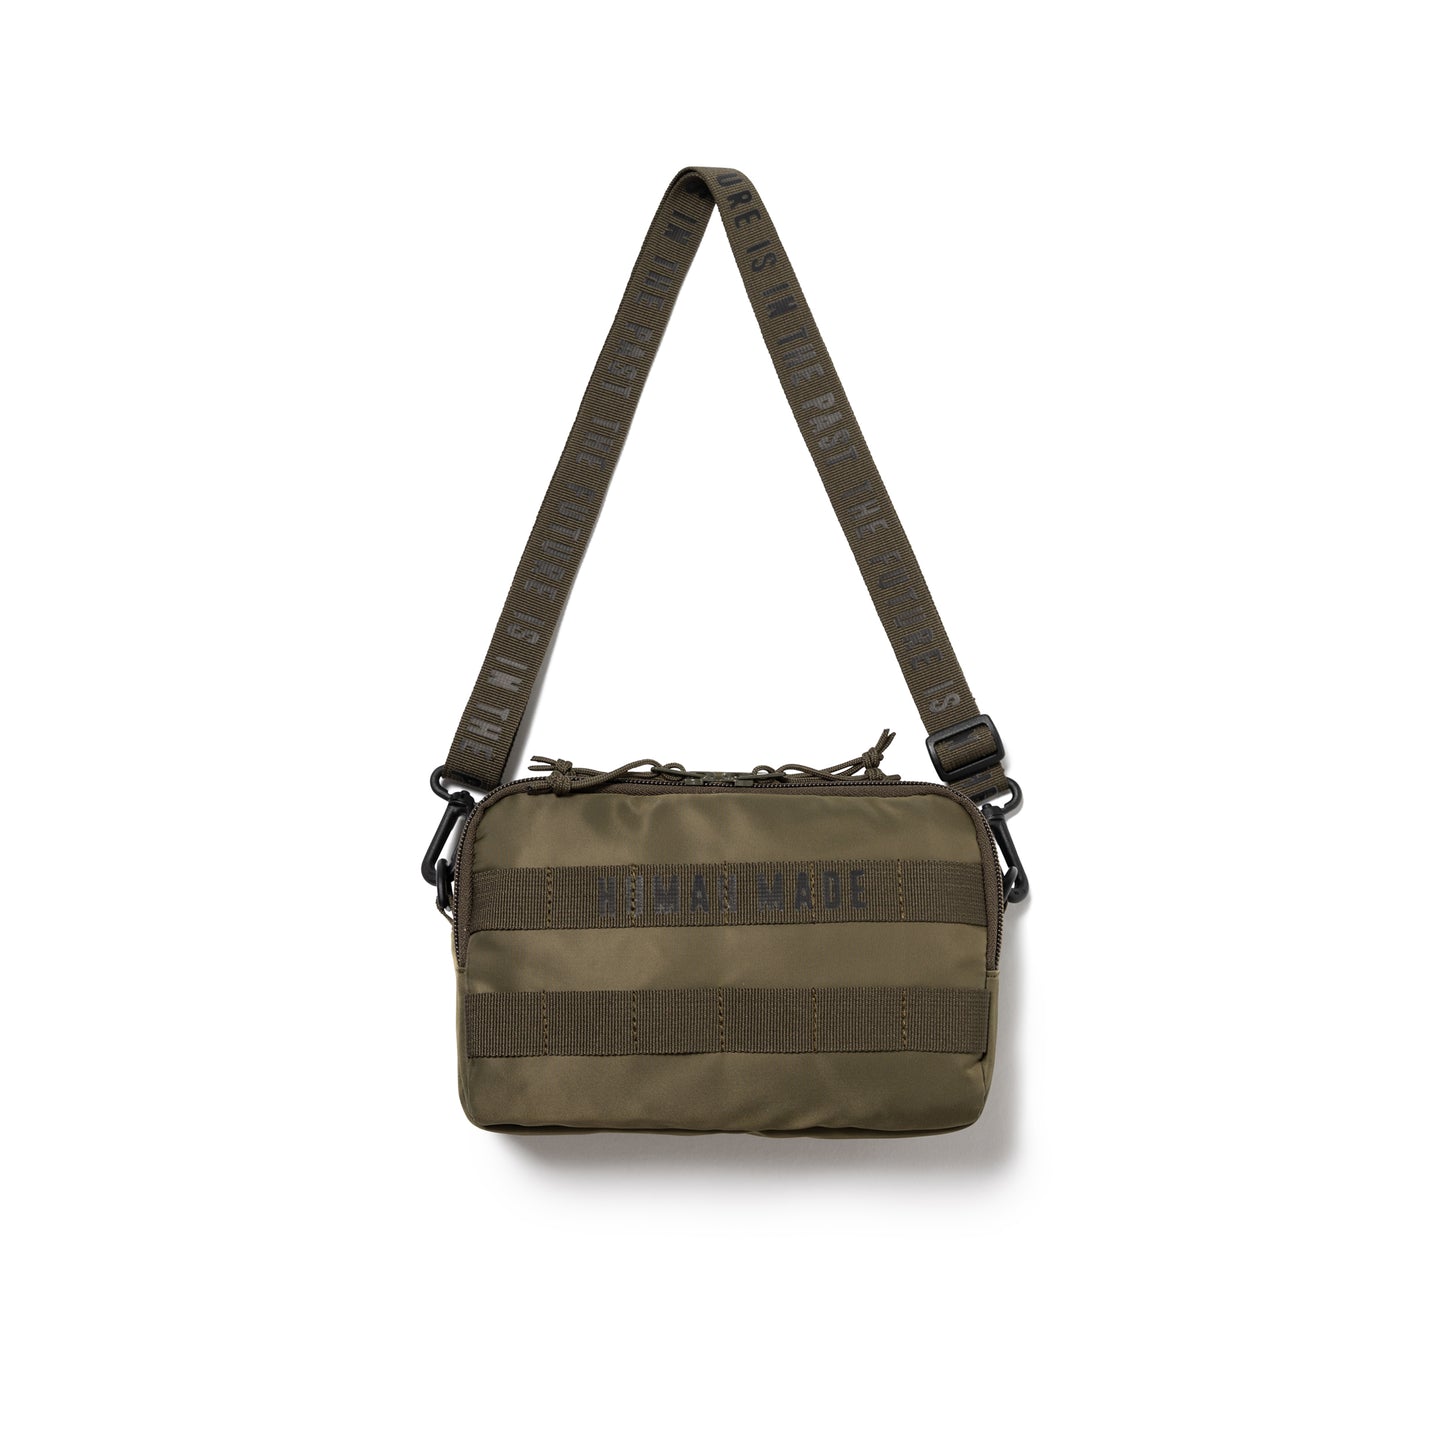 MILITARY POUCH SMALL – HUMAN MADE ONLINE STORE